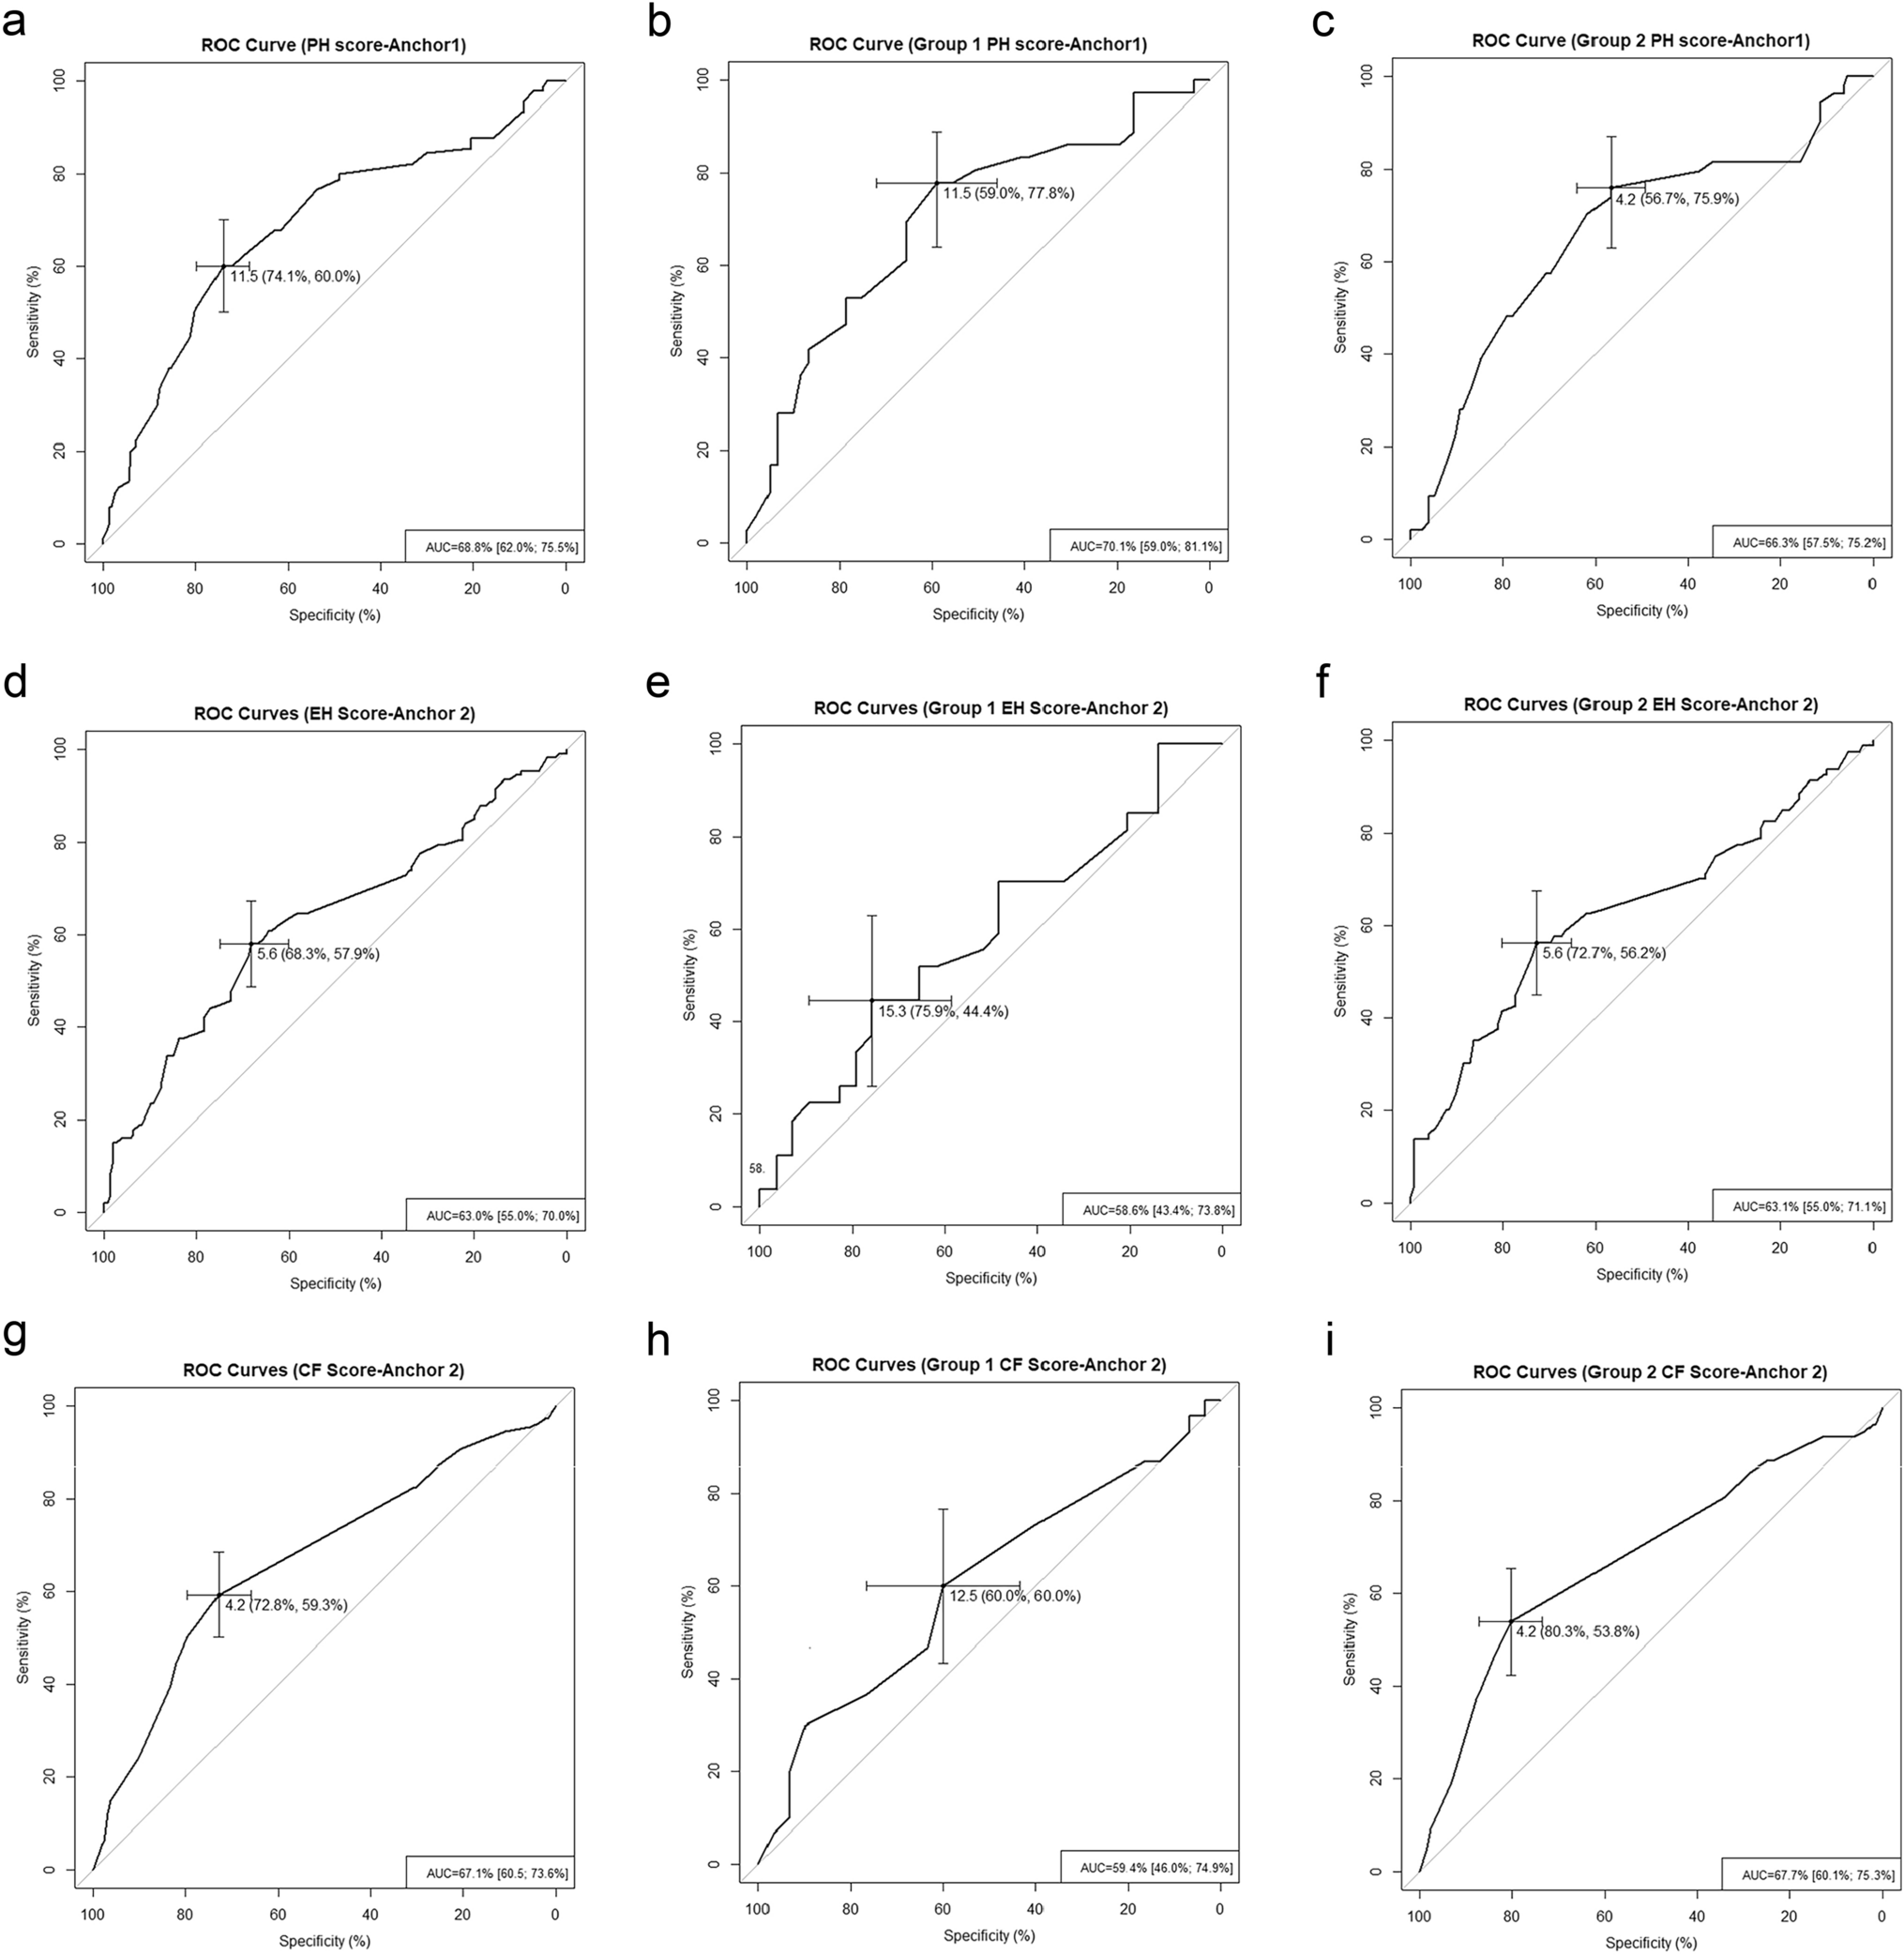 Minimal clinically important differences in health-related quality of life after treatment with direct-acting antivirals for chronic hepatitis C: ANRS CO22 HEPATHER cohort (PROQOL-HCV)